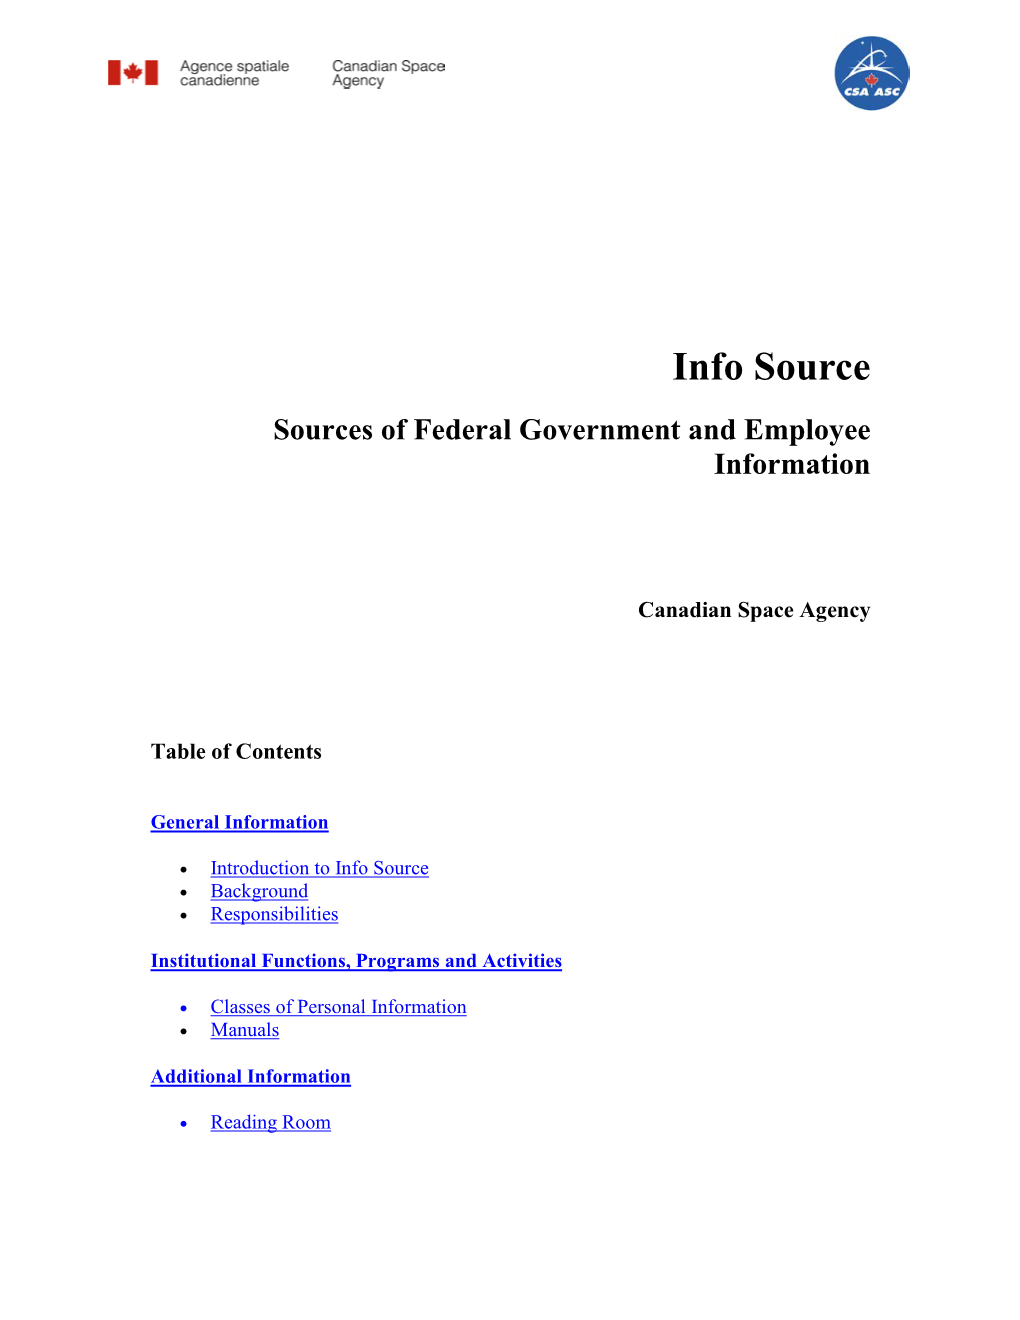 Info Source Sources of Federal Government and Employee Information